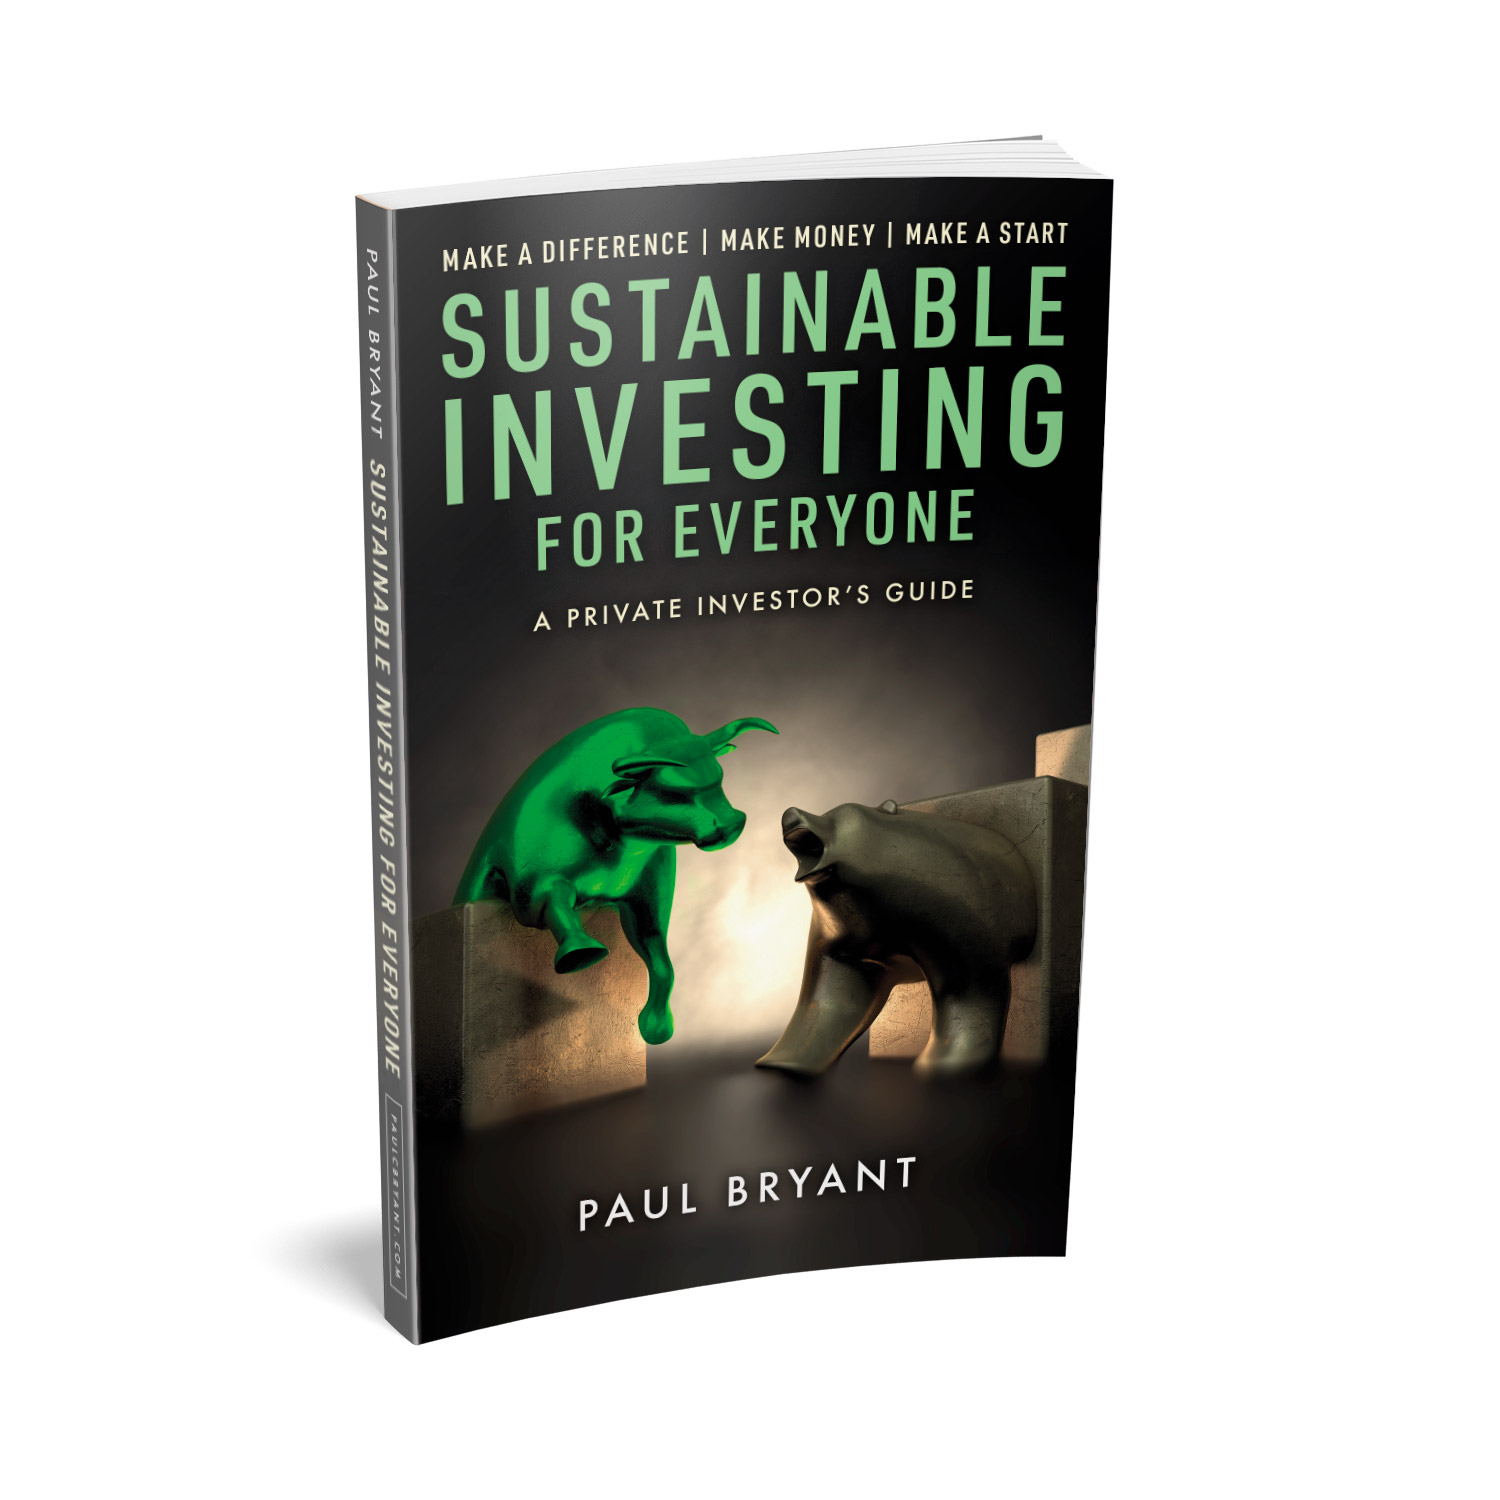 'Sustainable Investing For Everyone' is an excellent financial guide by Paul Bryant. The book cover design is by Mark Thomas. To learn more about what Mark could do for your book, please visit coverness.com.